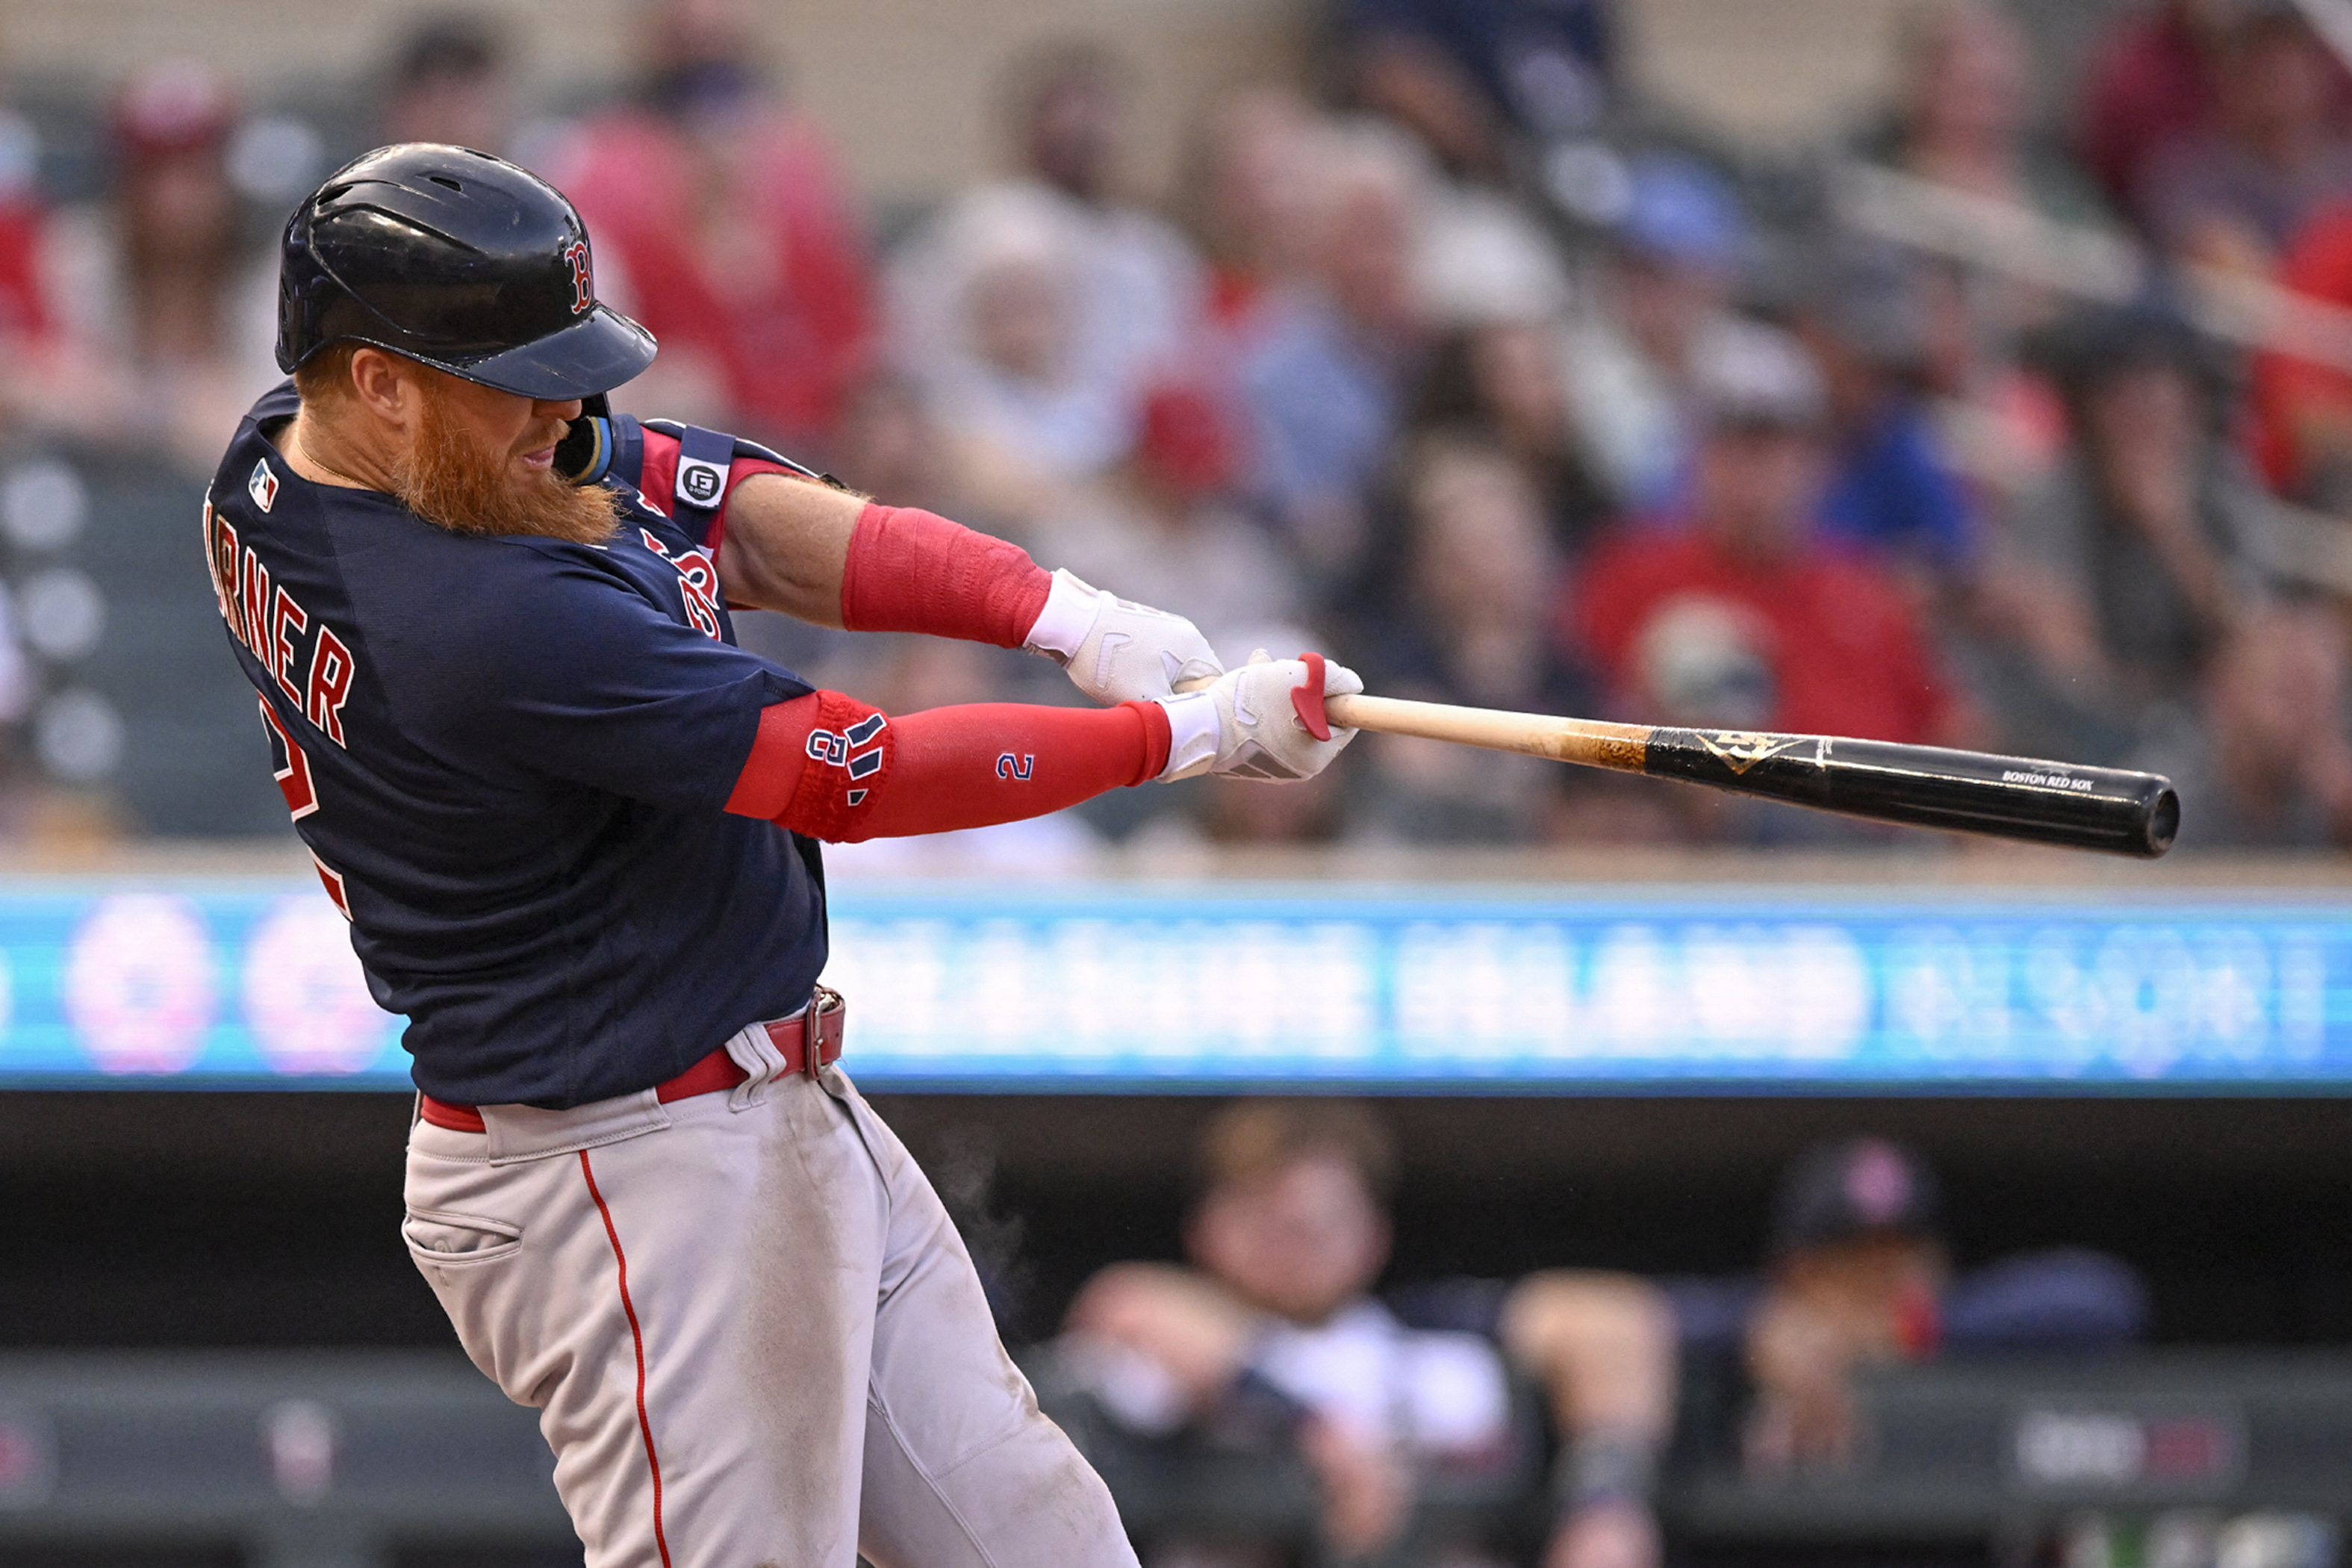 Kyle Farmer, Twins down Red Sox in 10th to snap skid